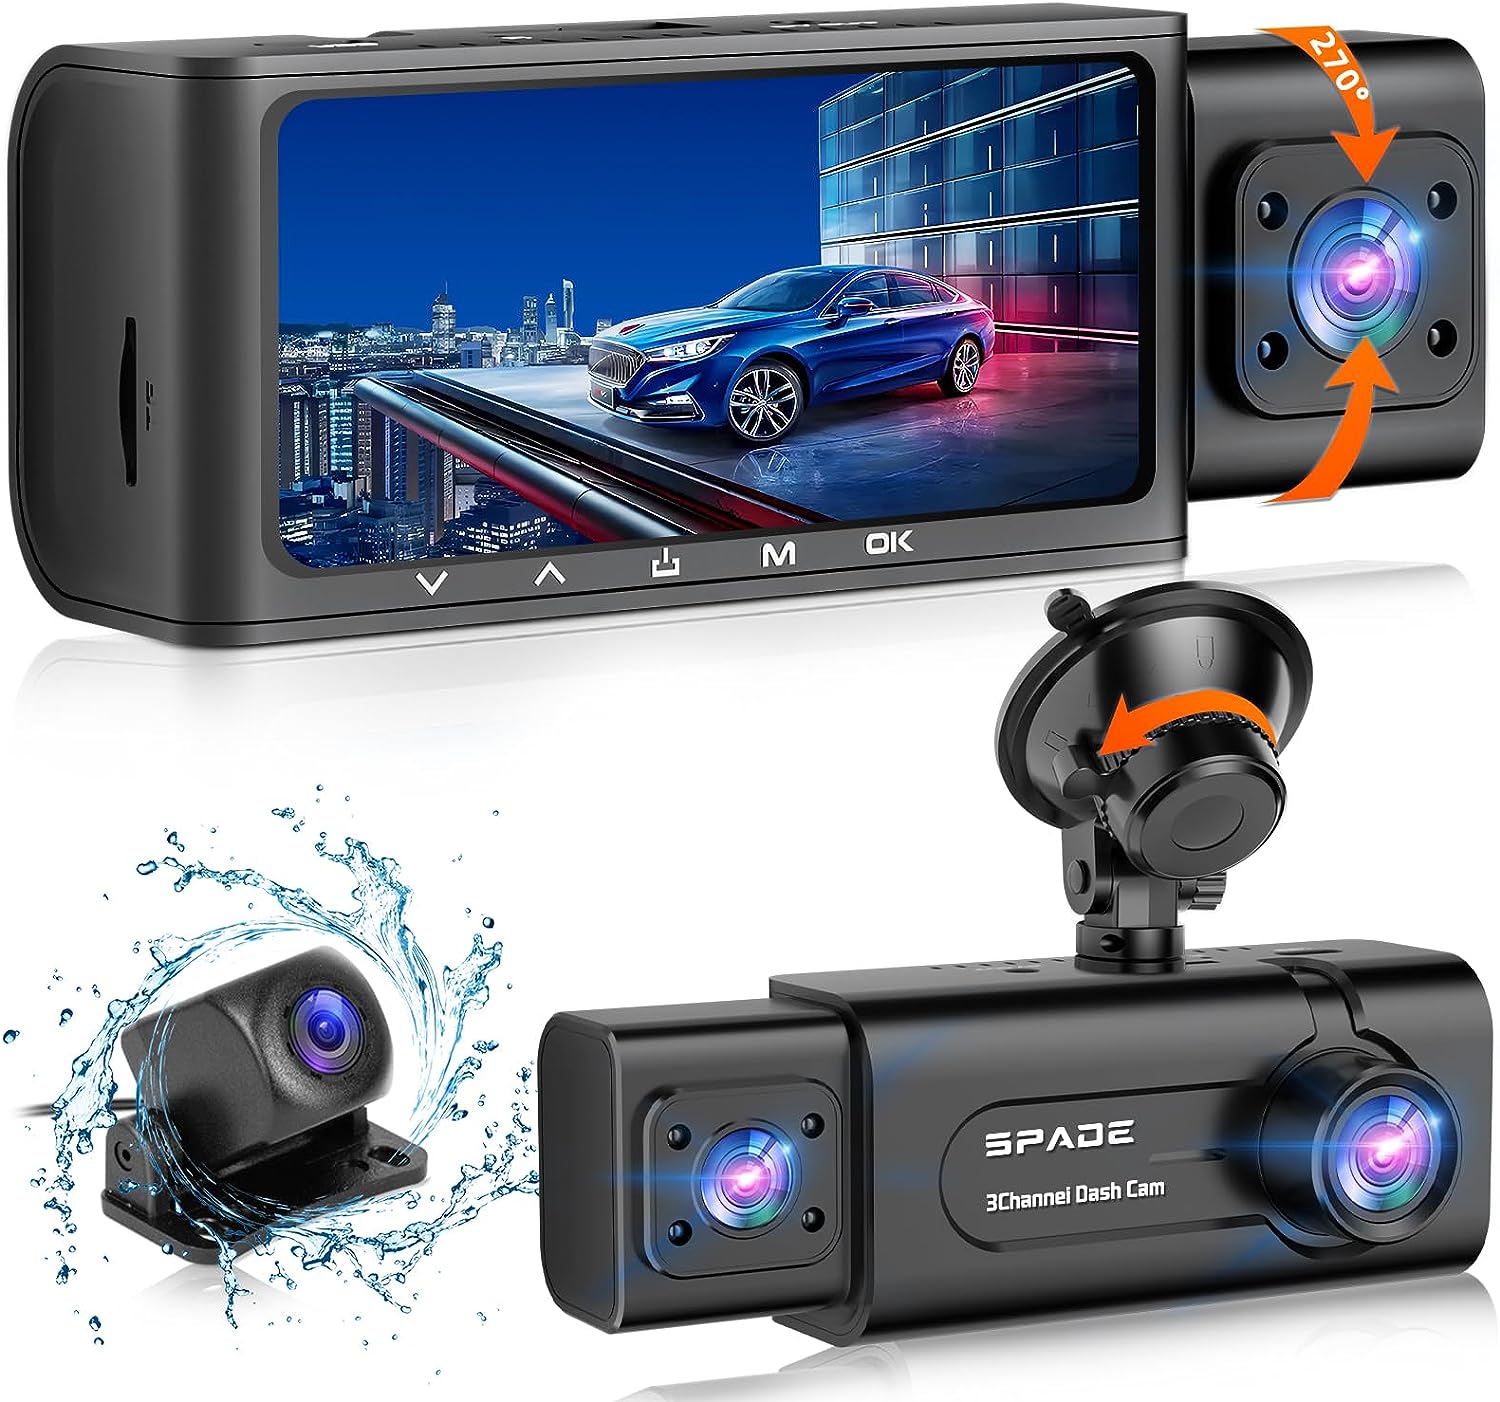 SPADE 3 Channel Dash Cam Front and Rear Inside, 1080P Full HD Dash Camera for Cars, Free 32GB SD Card, 170° Wide Angle, 3.16”IPS Screen, Night Vision, WDR, 24H Parking Mode